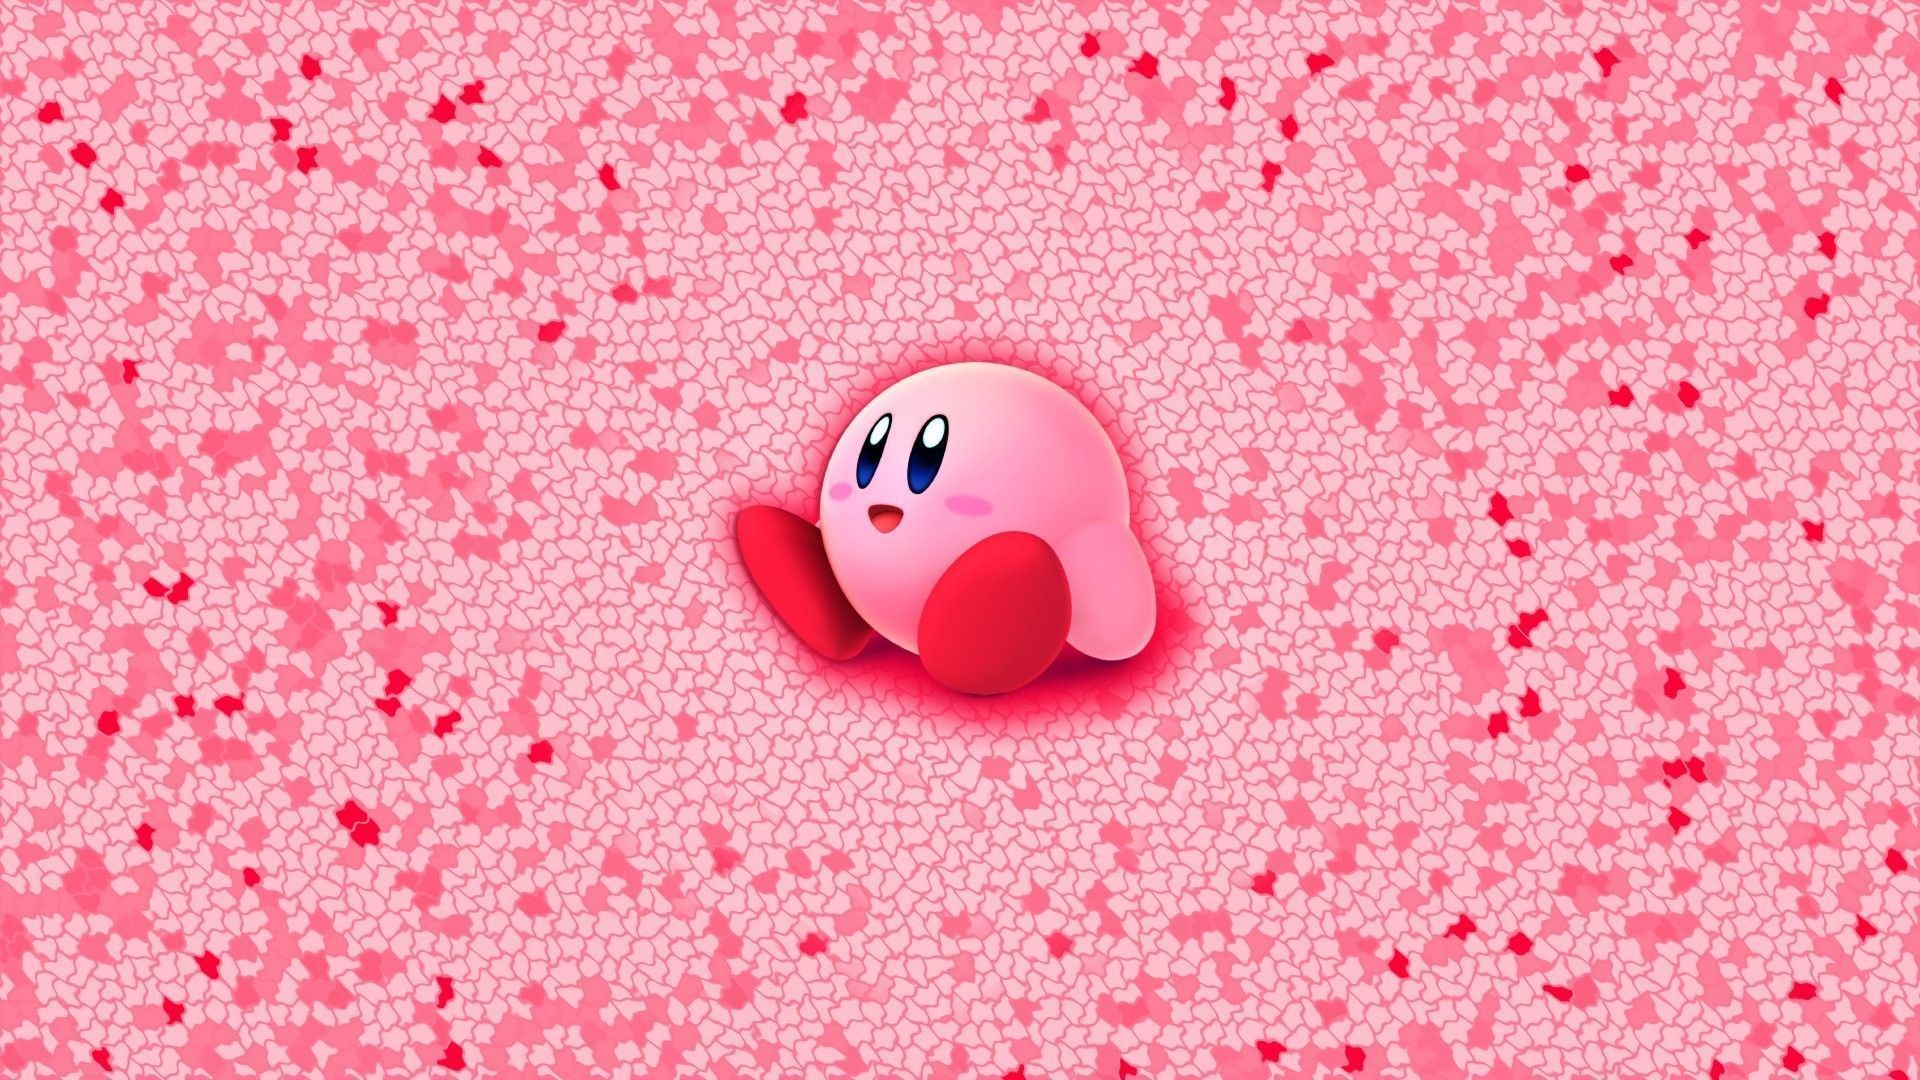 A pink mario character on top of red hearts - Nintendo